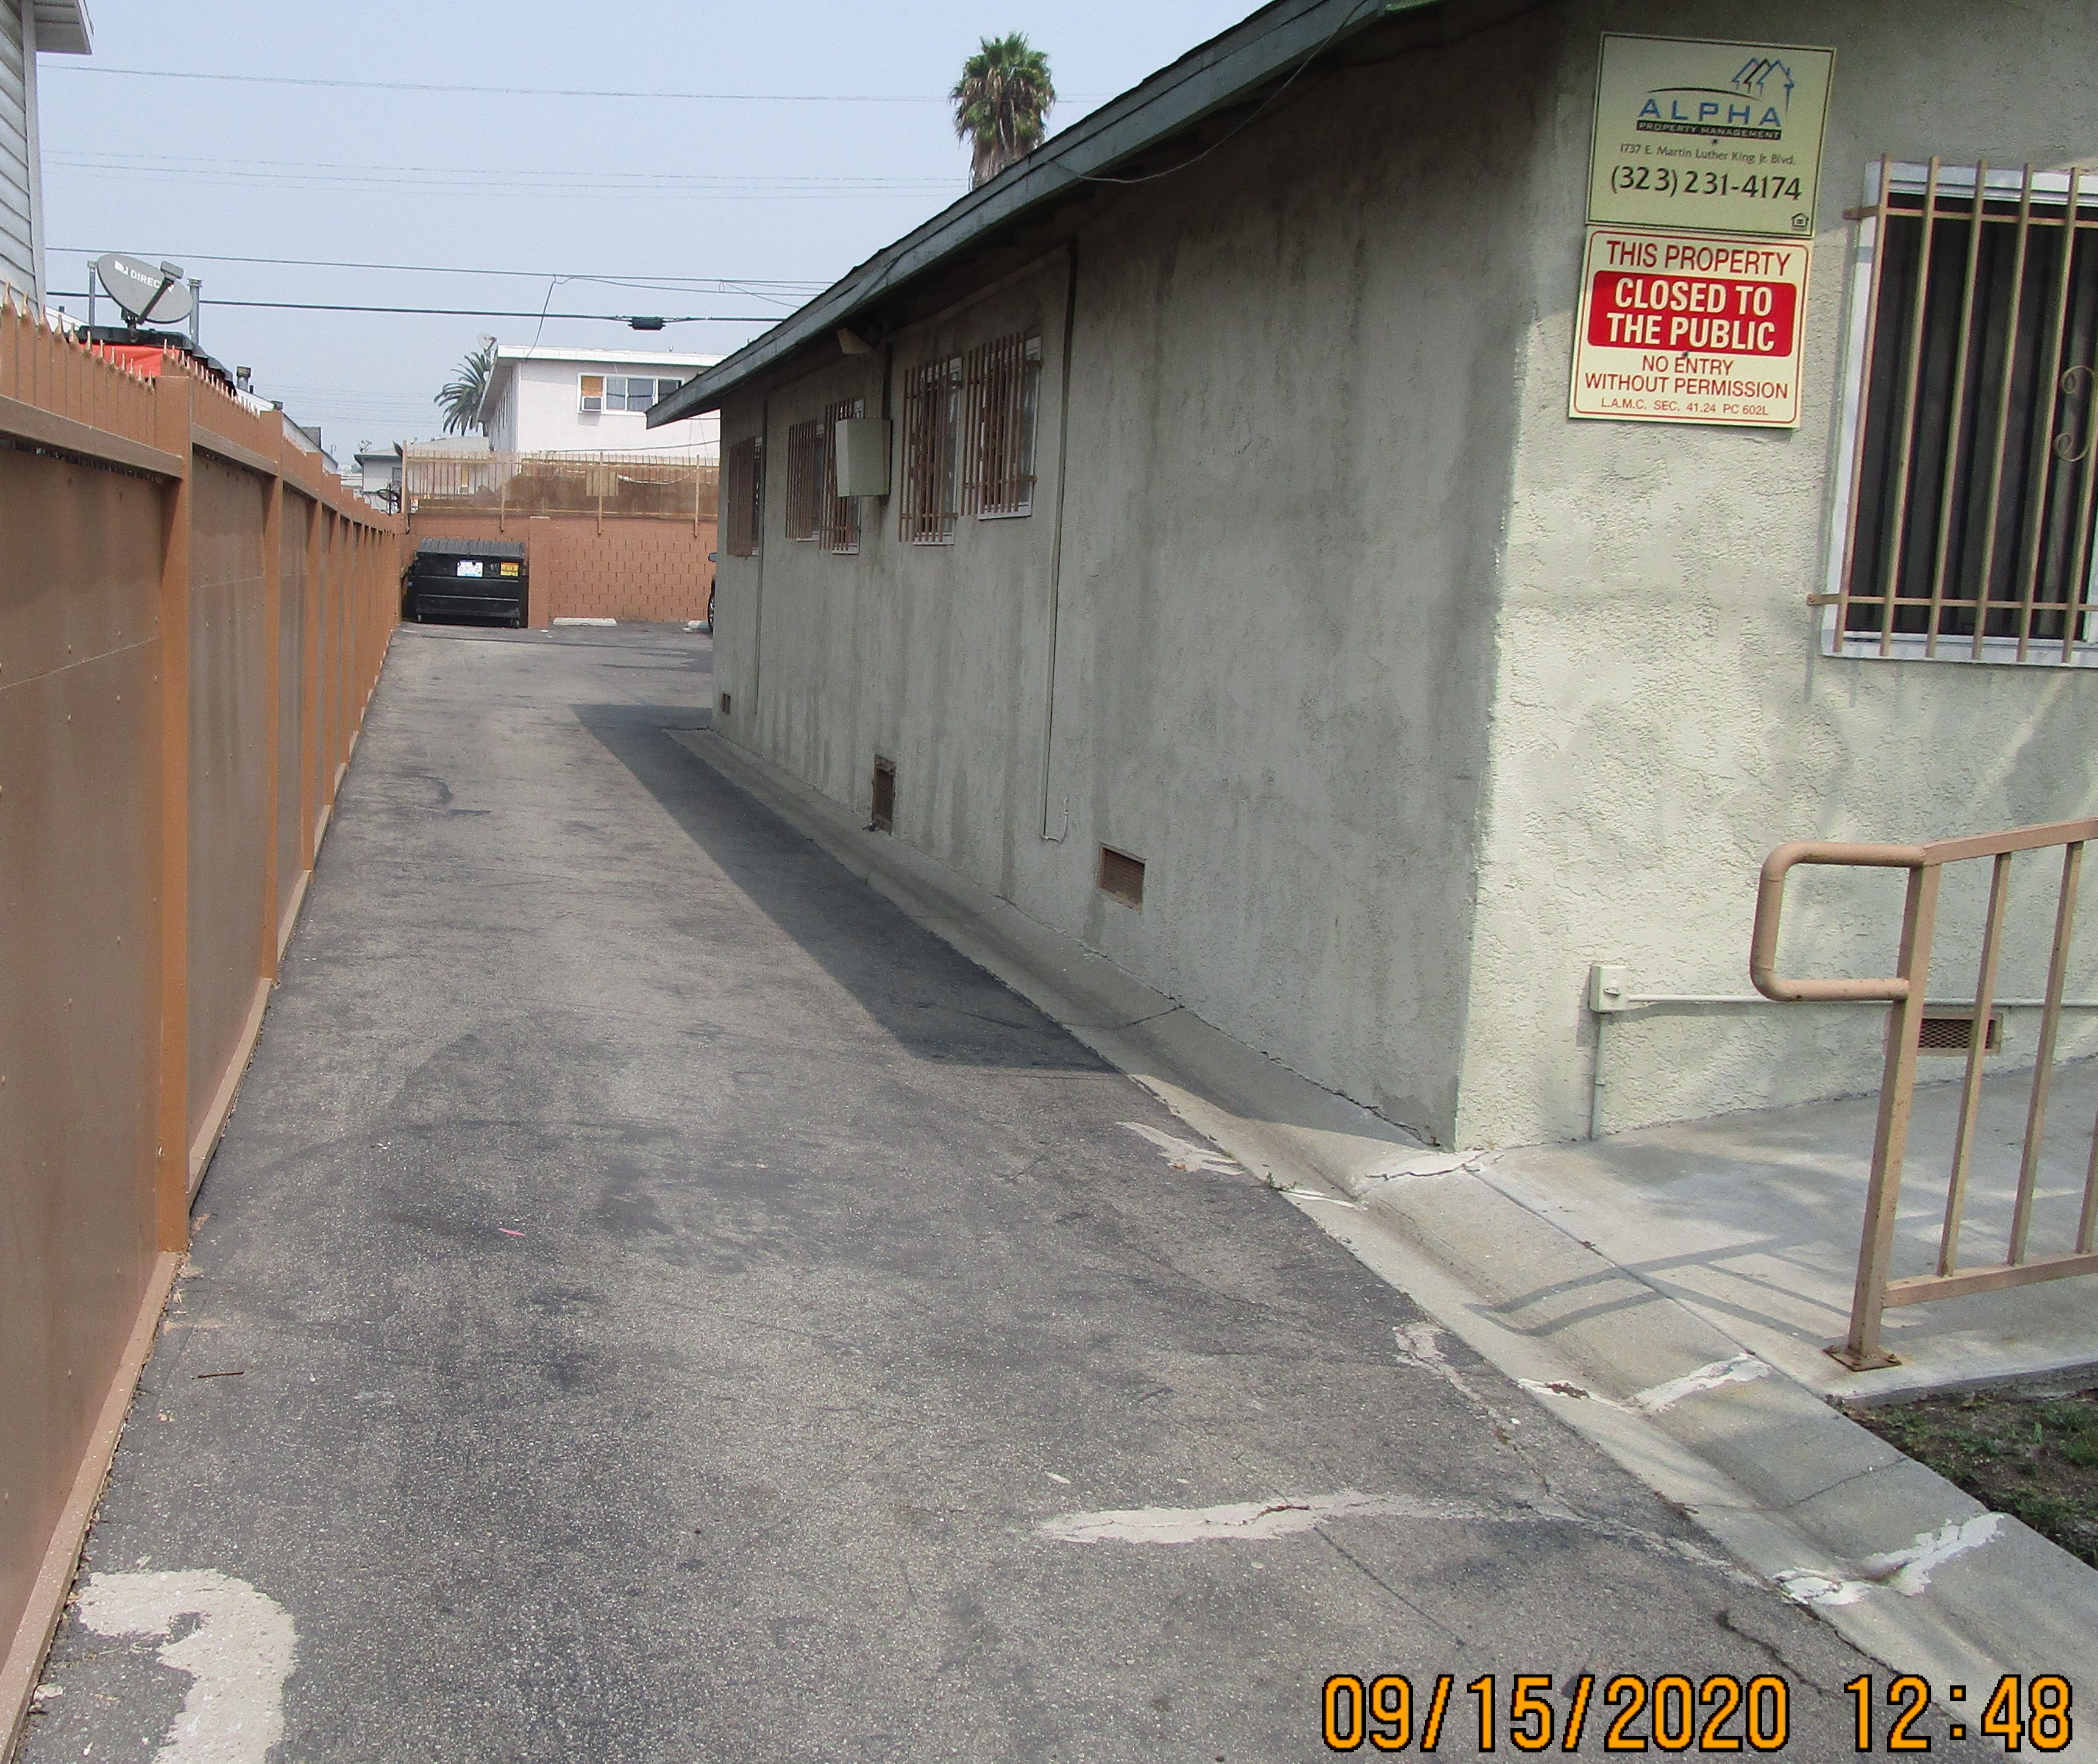 Front view of an open entrance to the parking, concrete, big brown trash bin against the wall at the end.